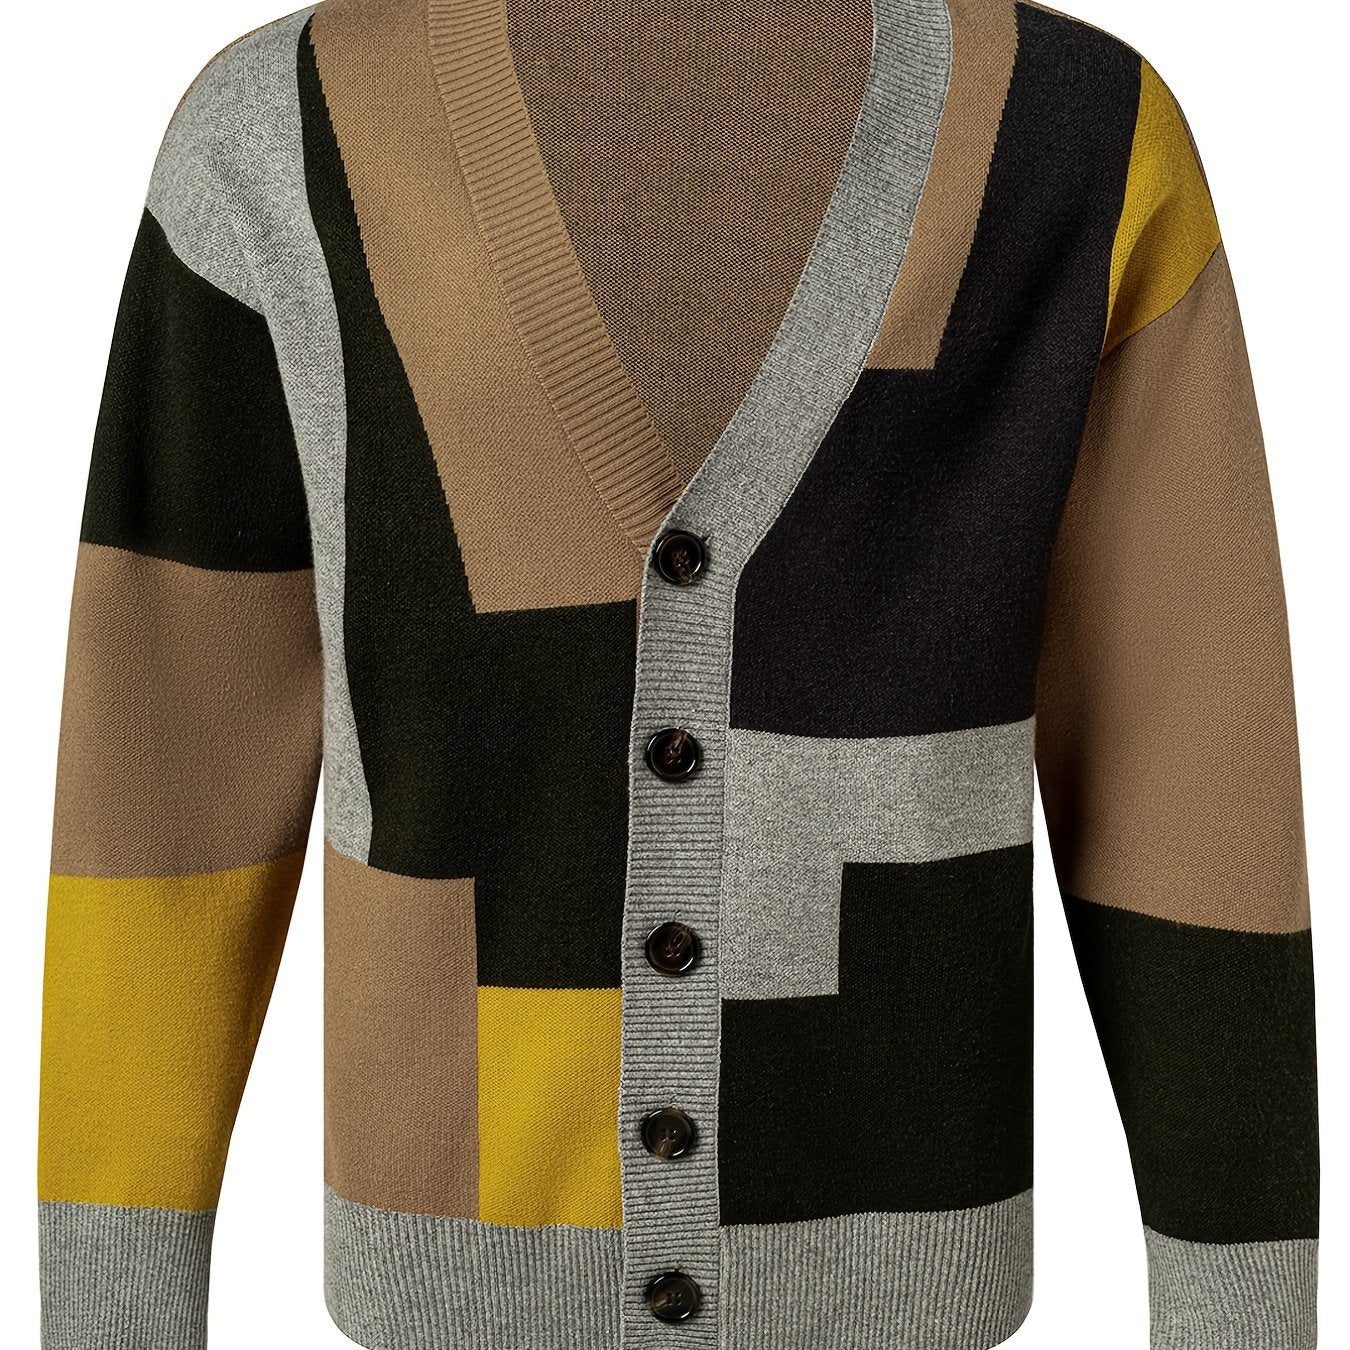 Men's Casual Vintage Style V Neck Sweater Cardigan